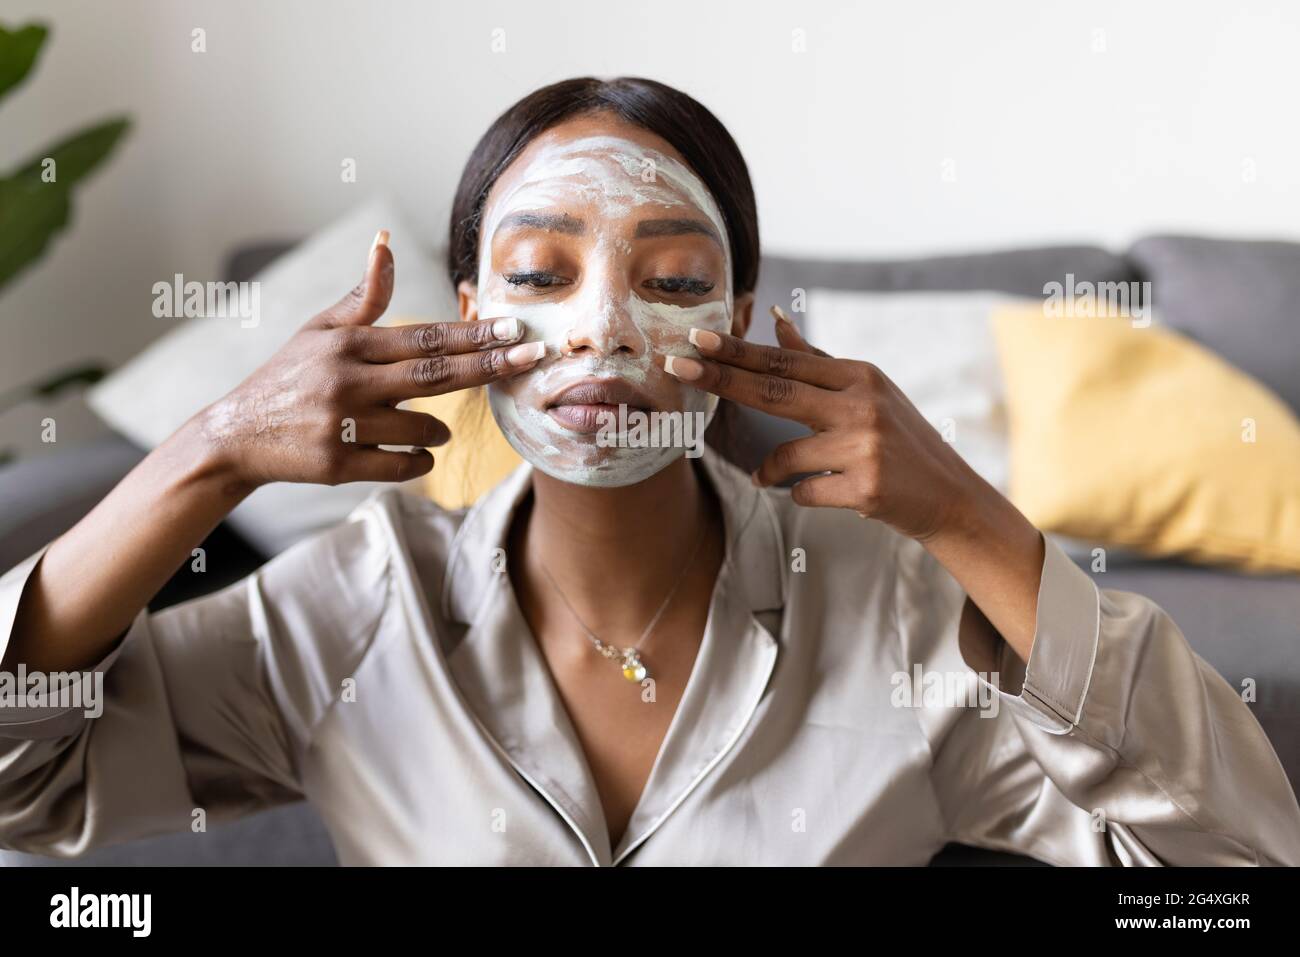 Young woman applying facial mask Banque D'Images